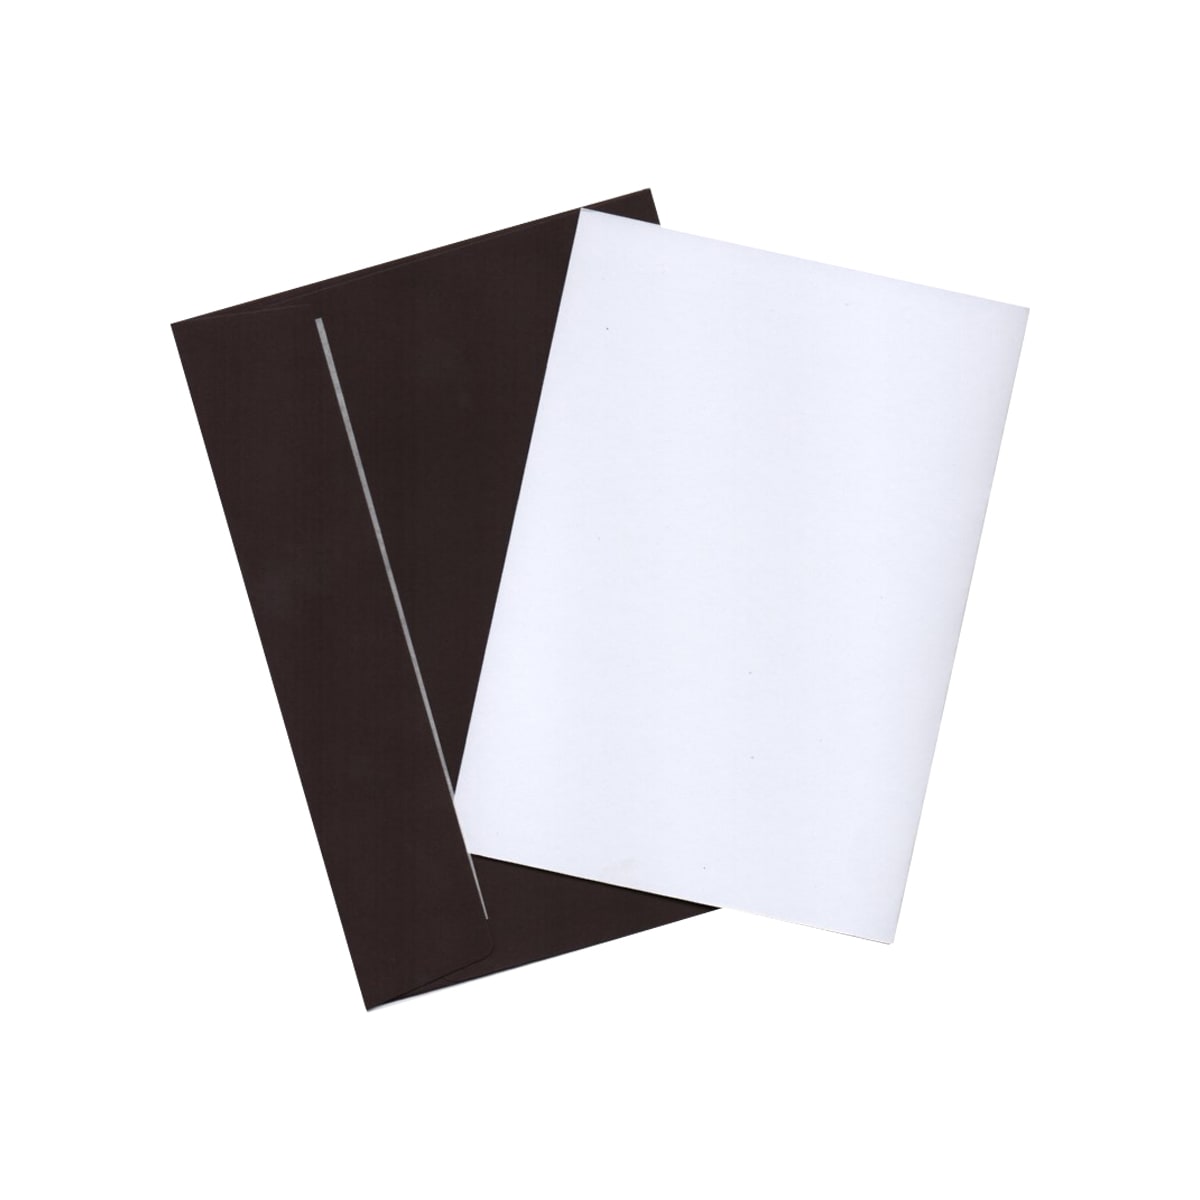 A6 White Card Blanks & Brown Peel and Seal Envelopes (Pack of 10)